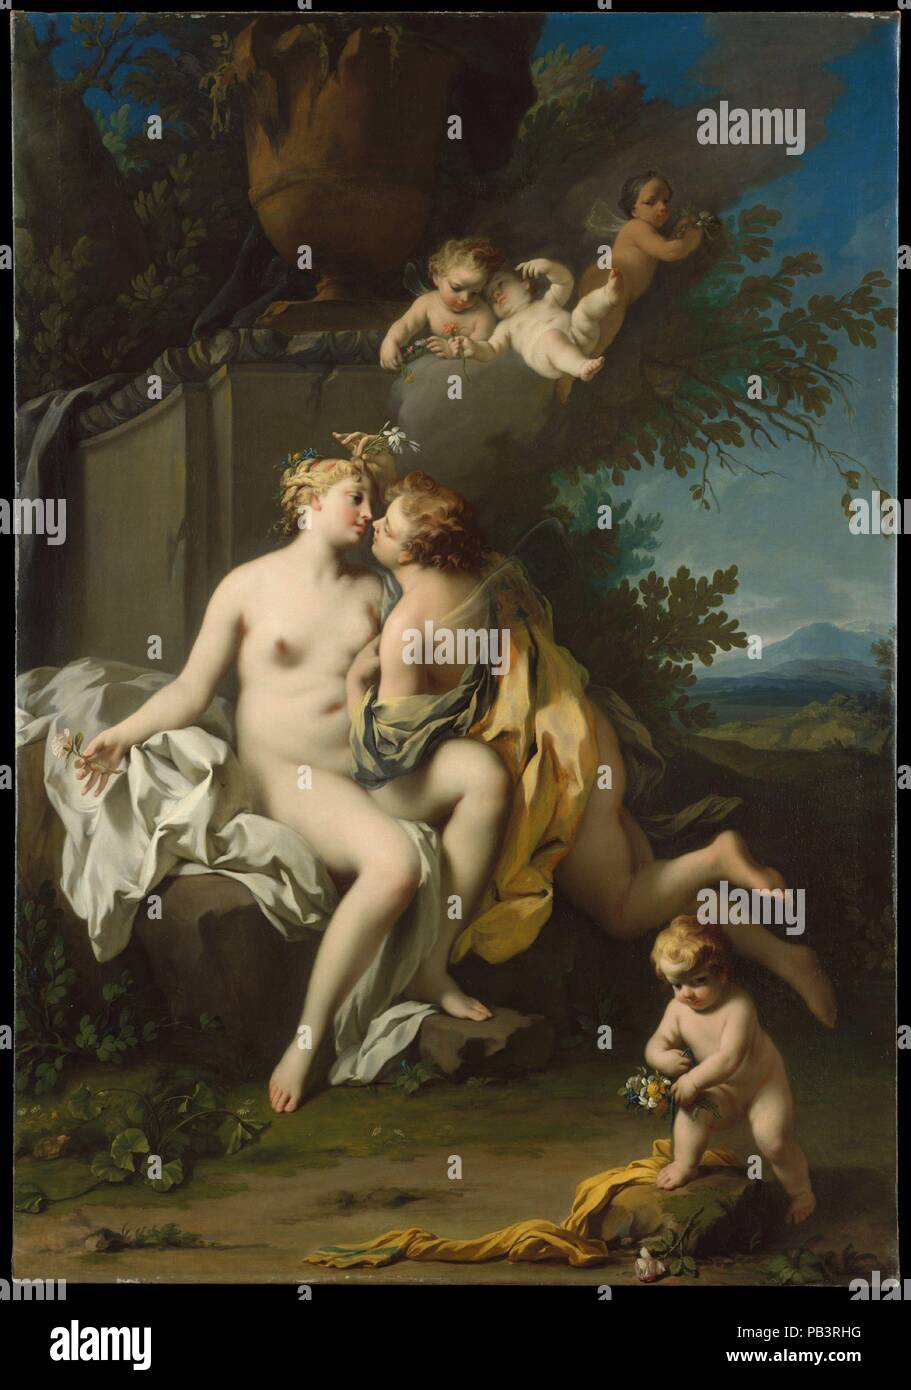 Flora and Zephyr. Artist: Jacopo Amigoni (Italian, Venice 1682-1752 Madrid). Dimensions: 84 x 58 in. (213.4 x 147.3 cm). Date: 1730s.  The Venetians Sebastiano Ricci, Giovanni Pellegrini, Giovanni Battista Tiepolo, and Amigoni all worked throughout Europe, achieving international reputations. A number of Amigoni's best pictures were painted for clients in England, where he worked between 1729 and 1739. This picture, which celebrates the coming of spring in the union of Zephyr with Flora, is one of a pair dating to his English period. The pendant, now in a private collection, shows Venus and Ad Stock Photo